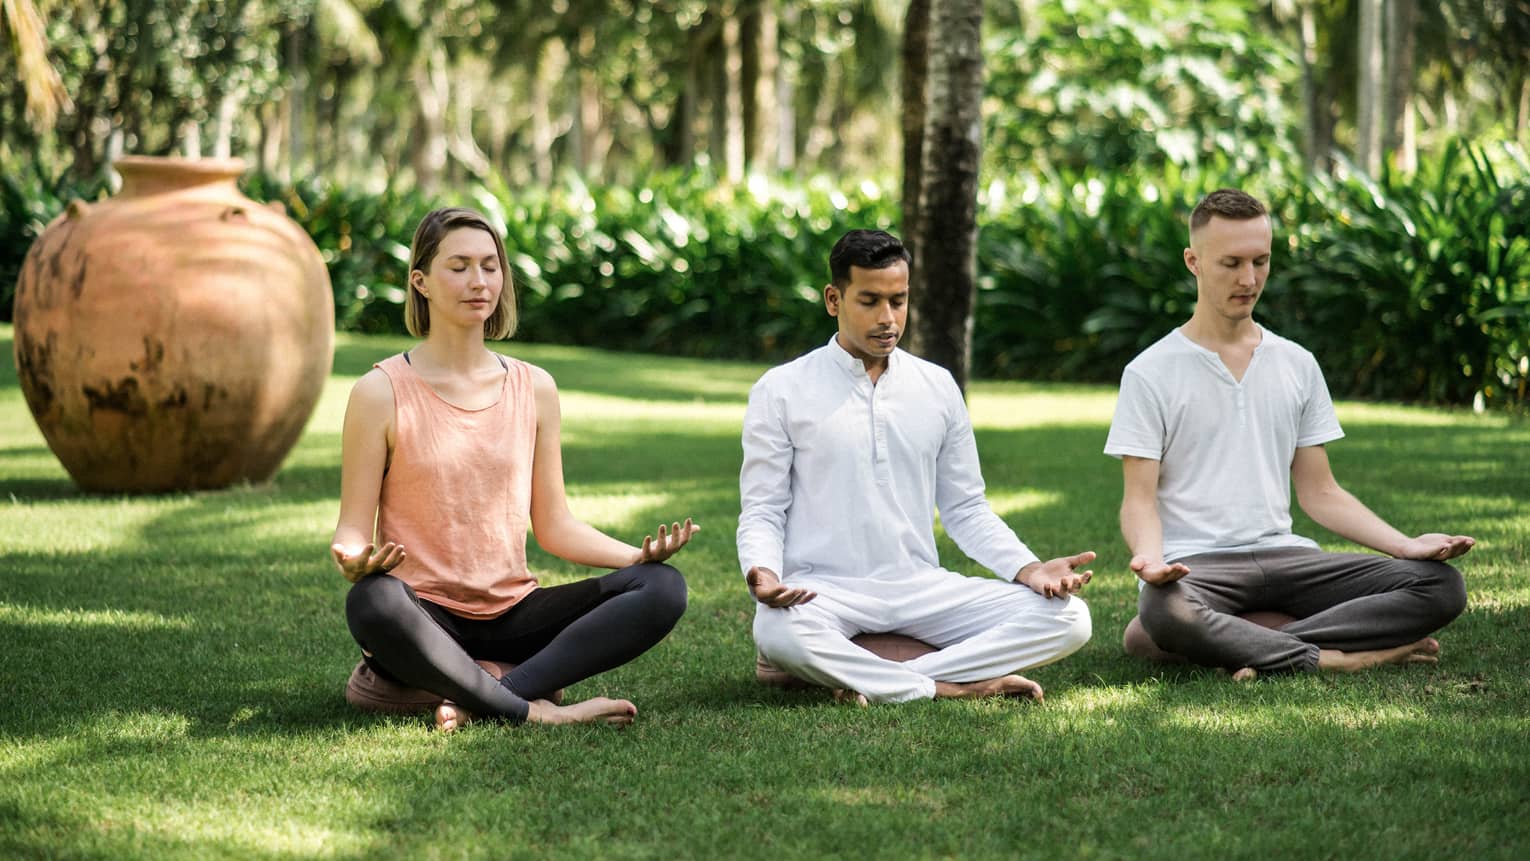 Two men and a woman practise meditation yoga outdoors on lawn